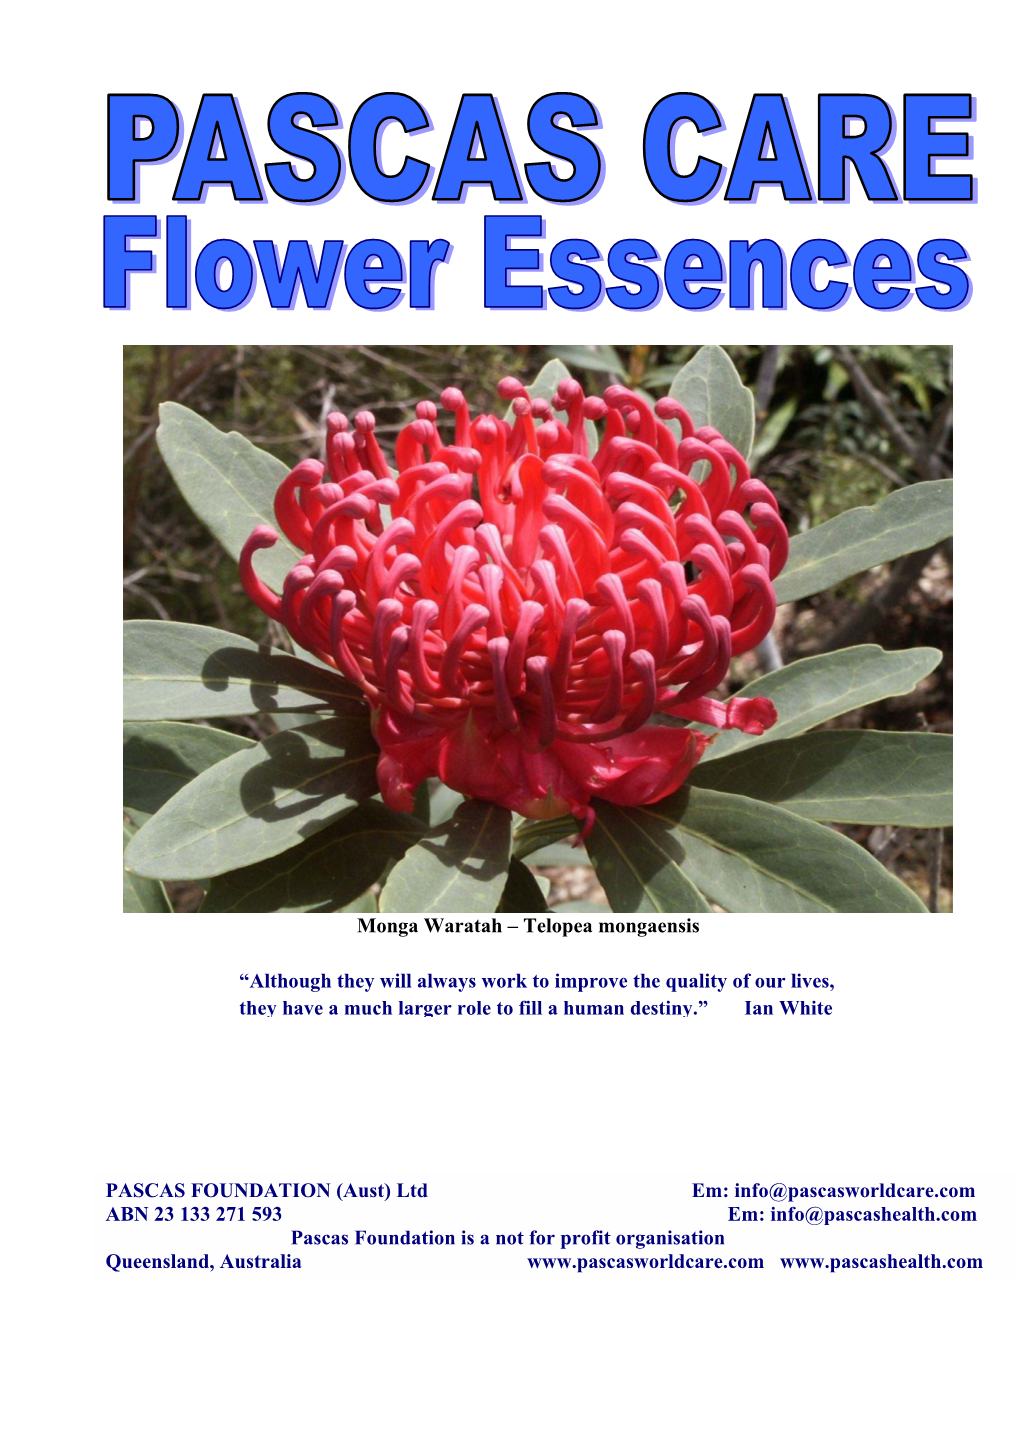 Monga Waratah – Telopea Mongaensis “Although They Will Always Work to Improve the Quality of Our Lives, They Have a Much